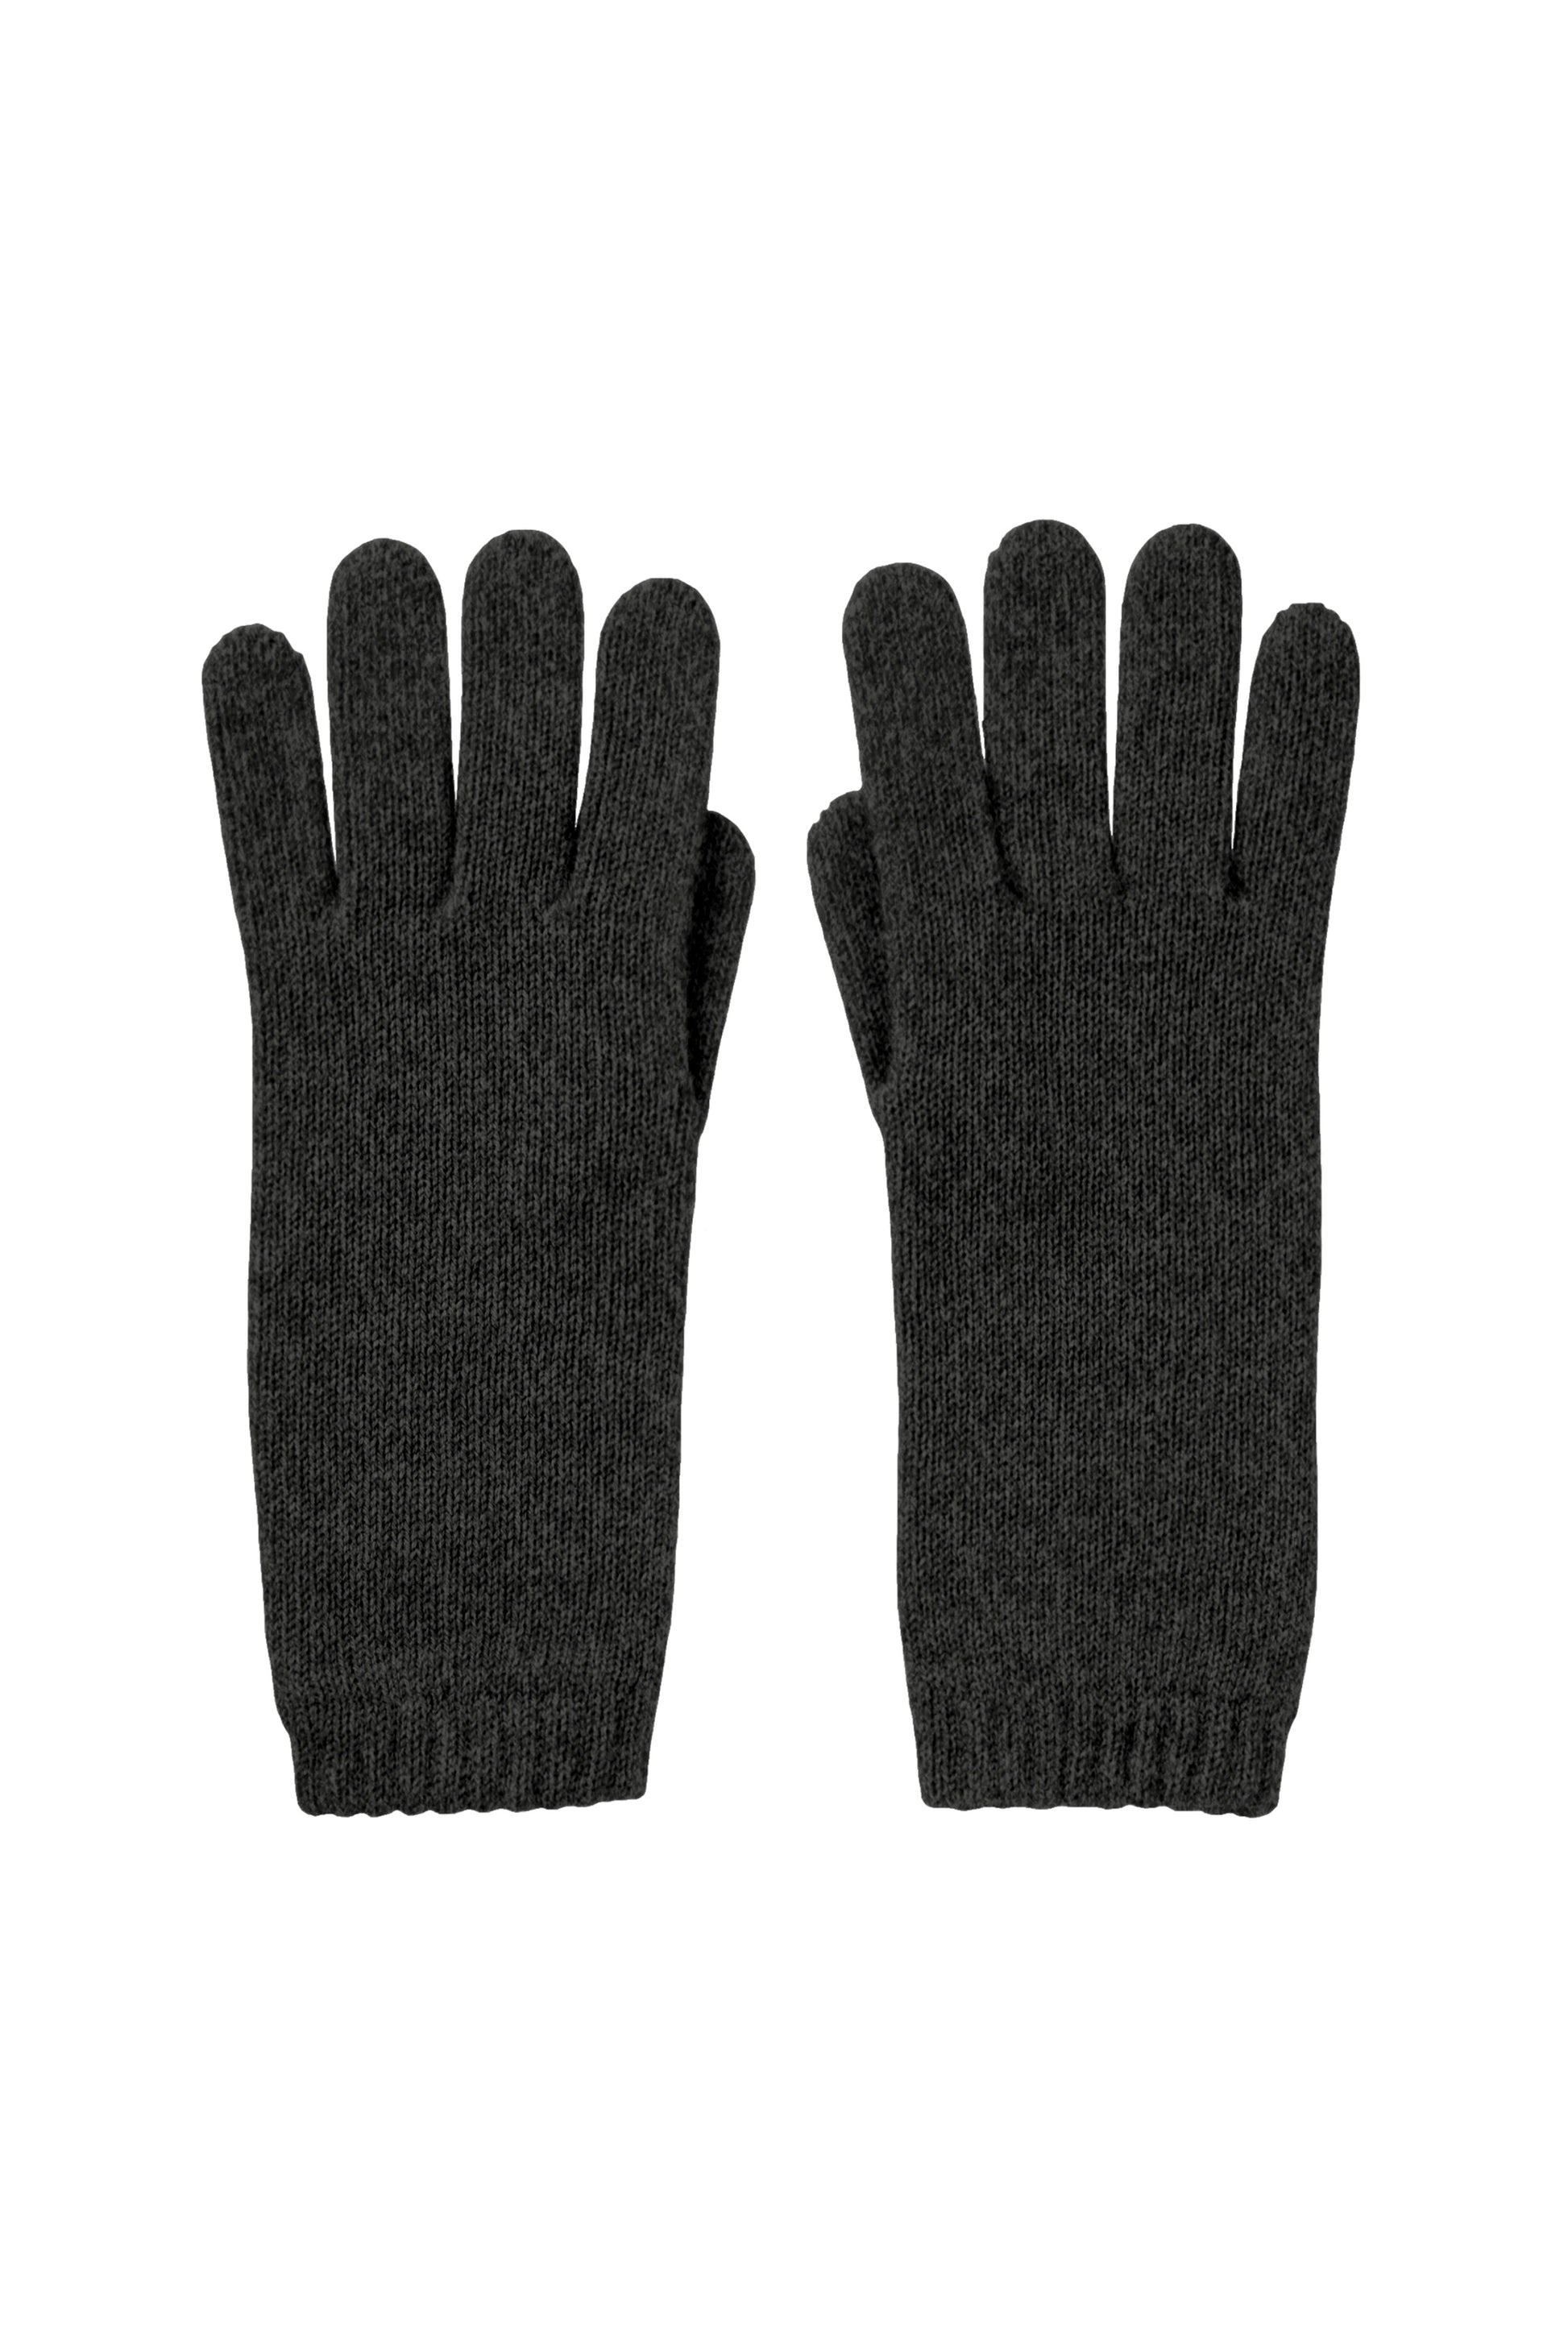 Johnstons of Elgin AW24 Knitted Accessory Mid Grey Women's Cashmere Gloves HAD03226HA4181ONE